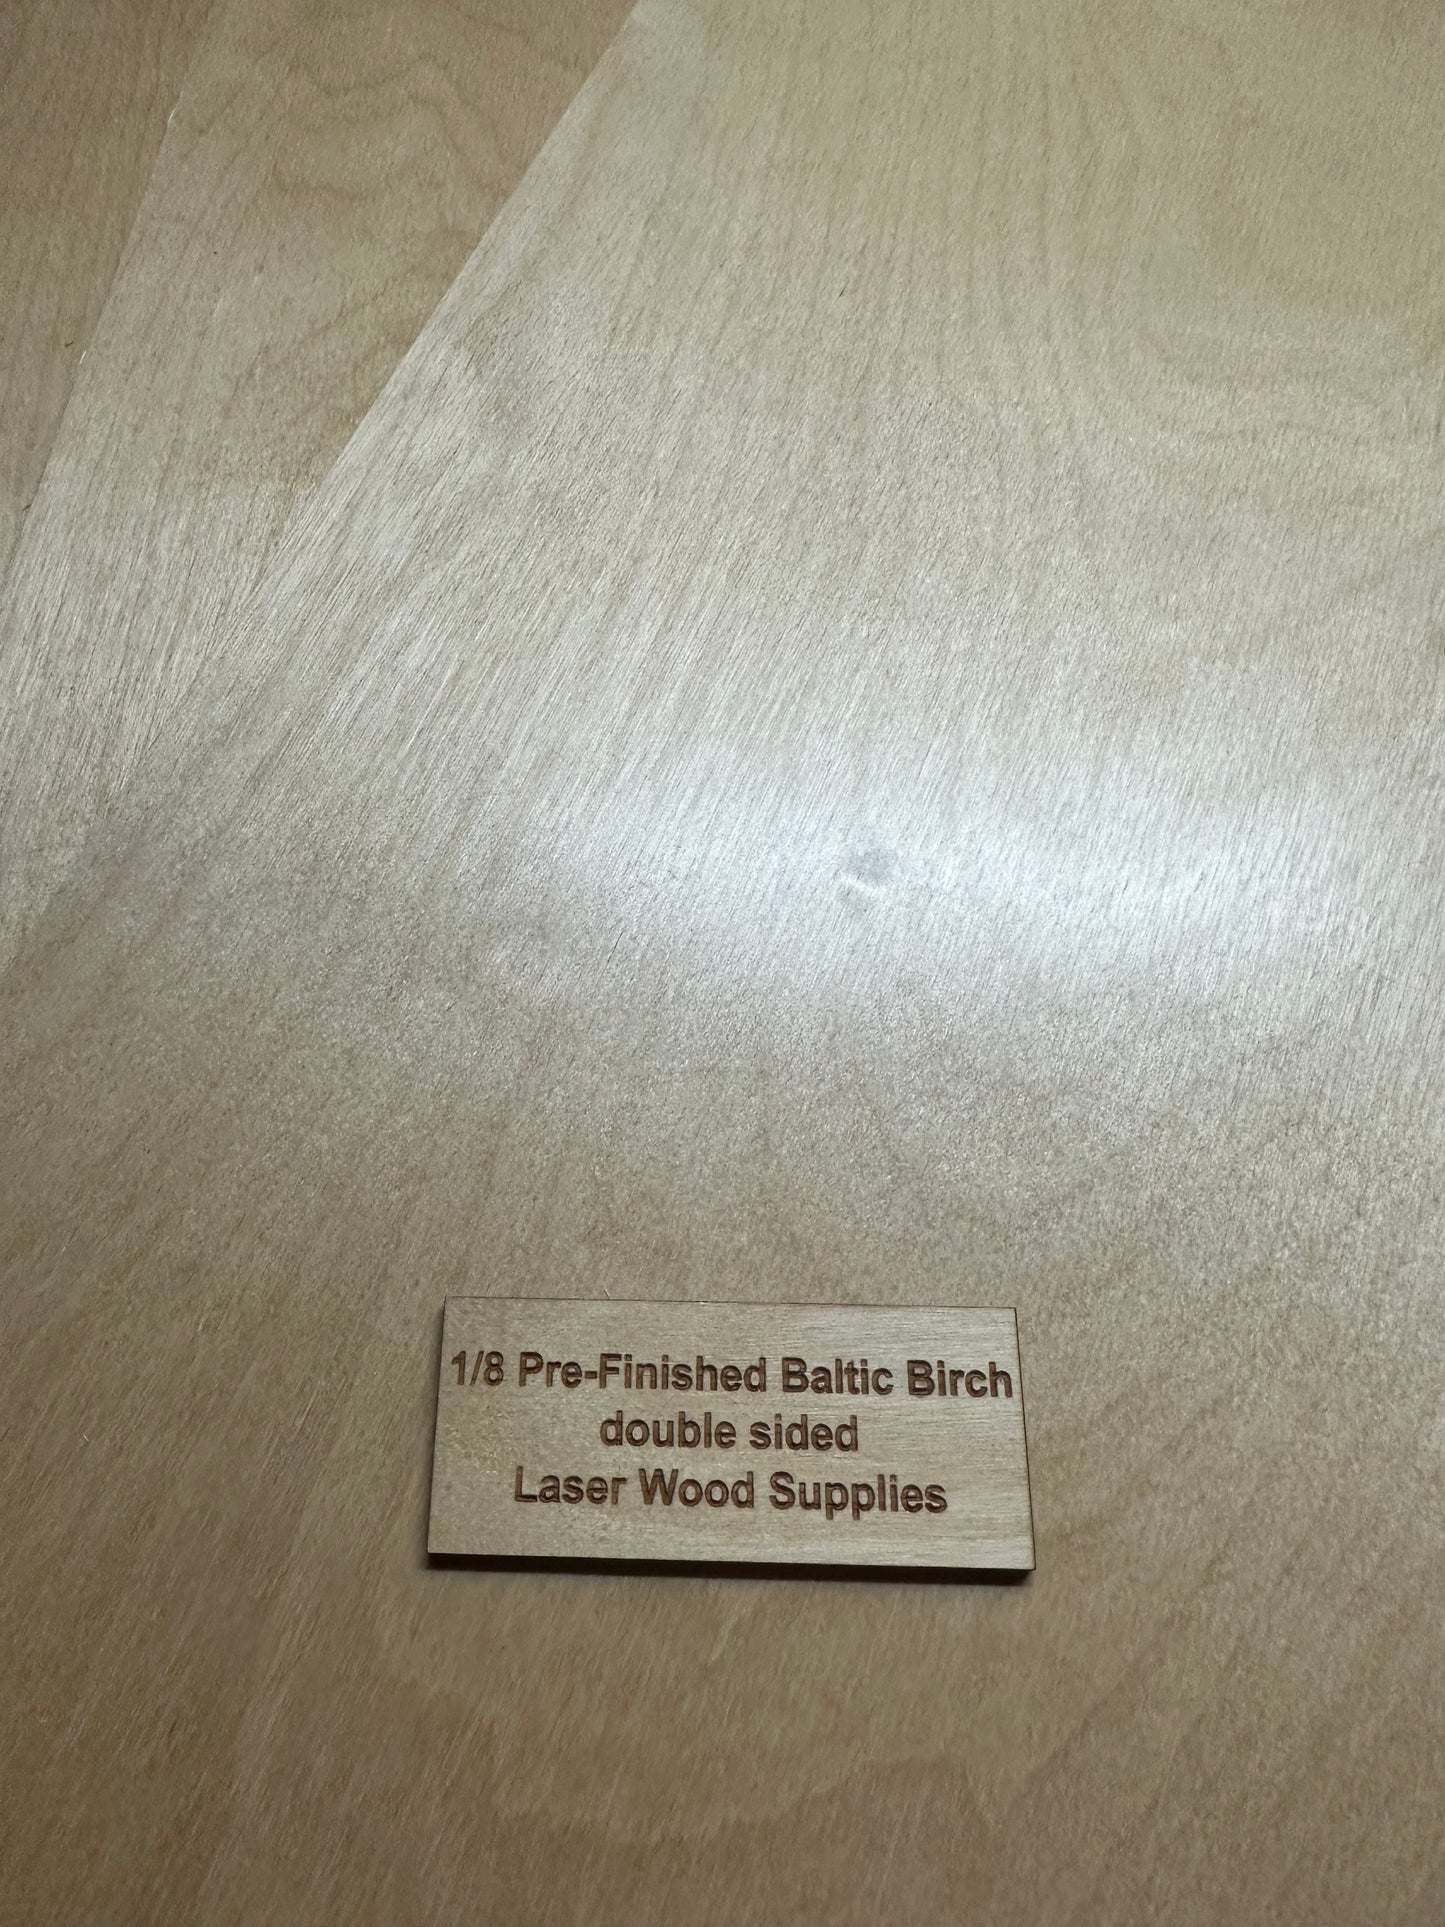 Pre-Finished Baltic Birch Plywood sheets, 3.5mm Thick,  perfect for Glowforge/Laser Cutting